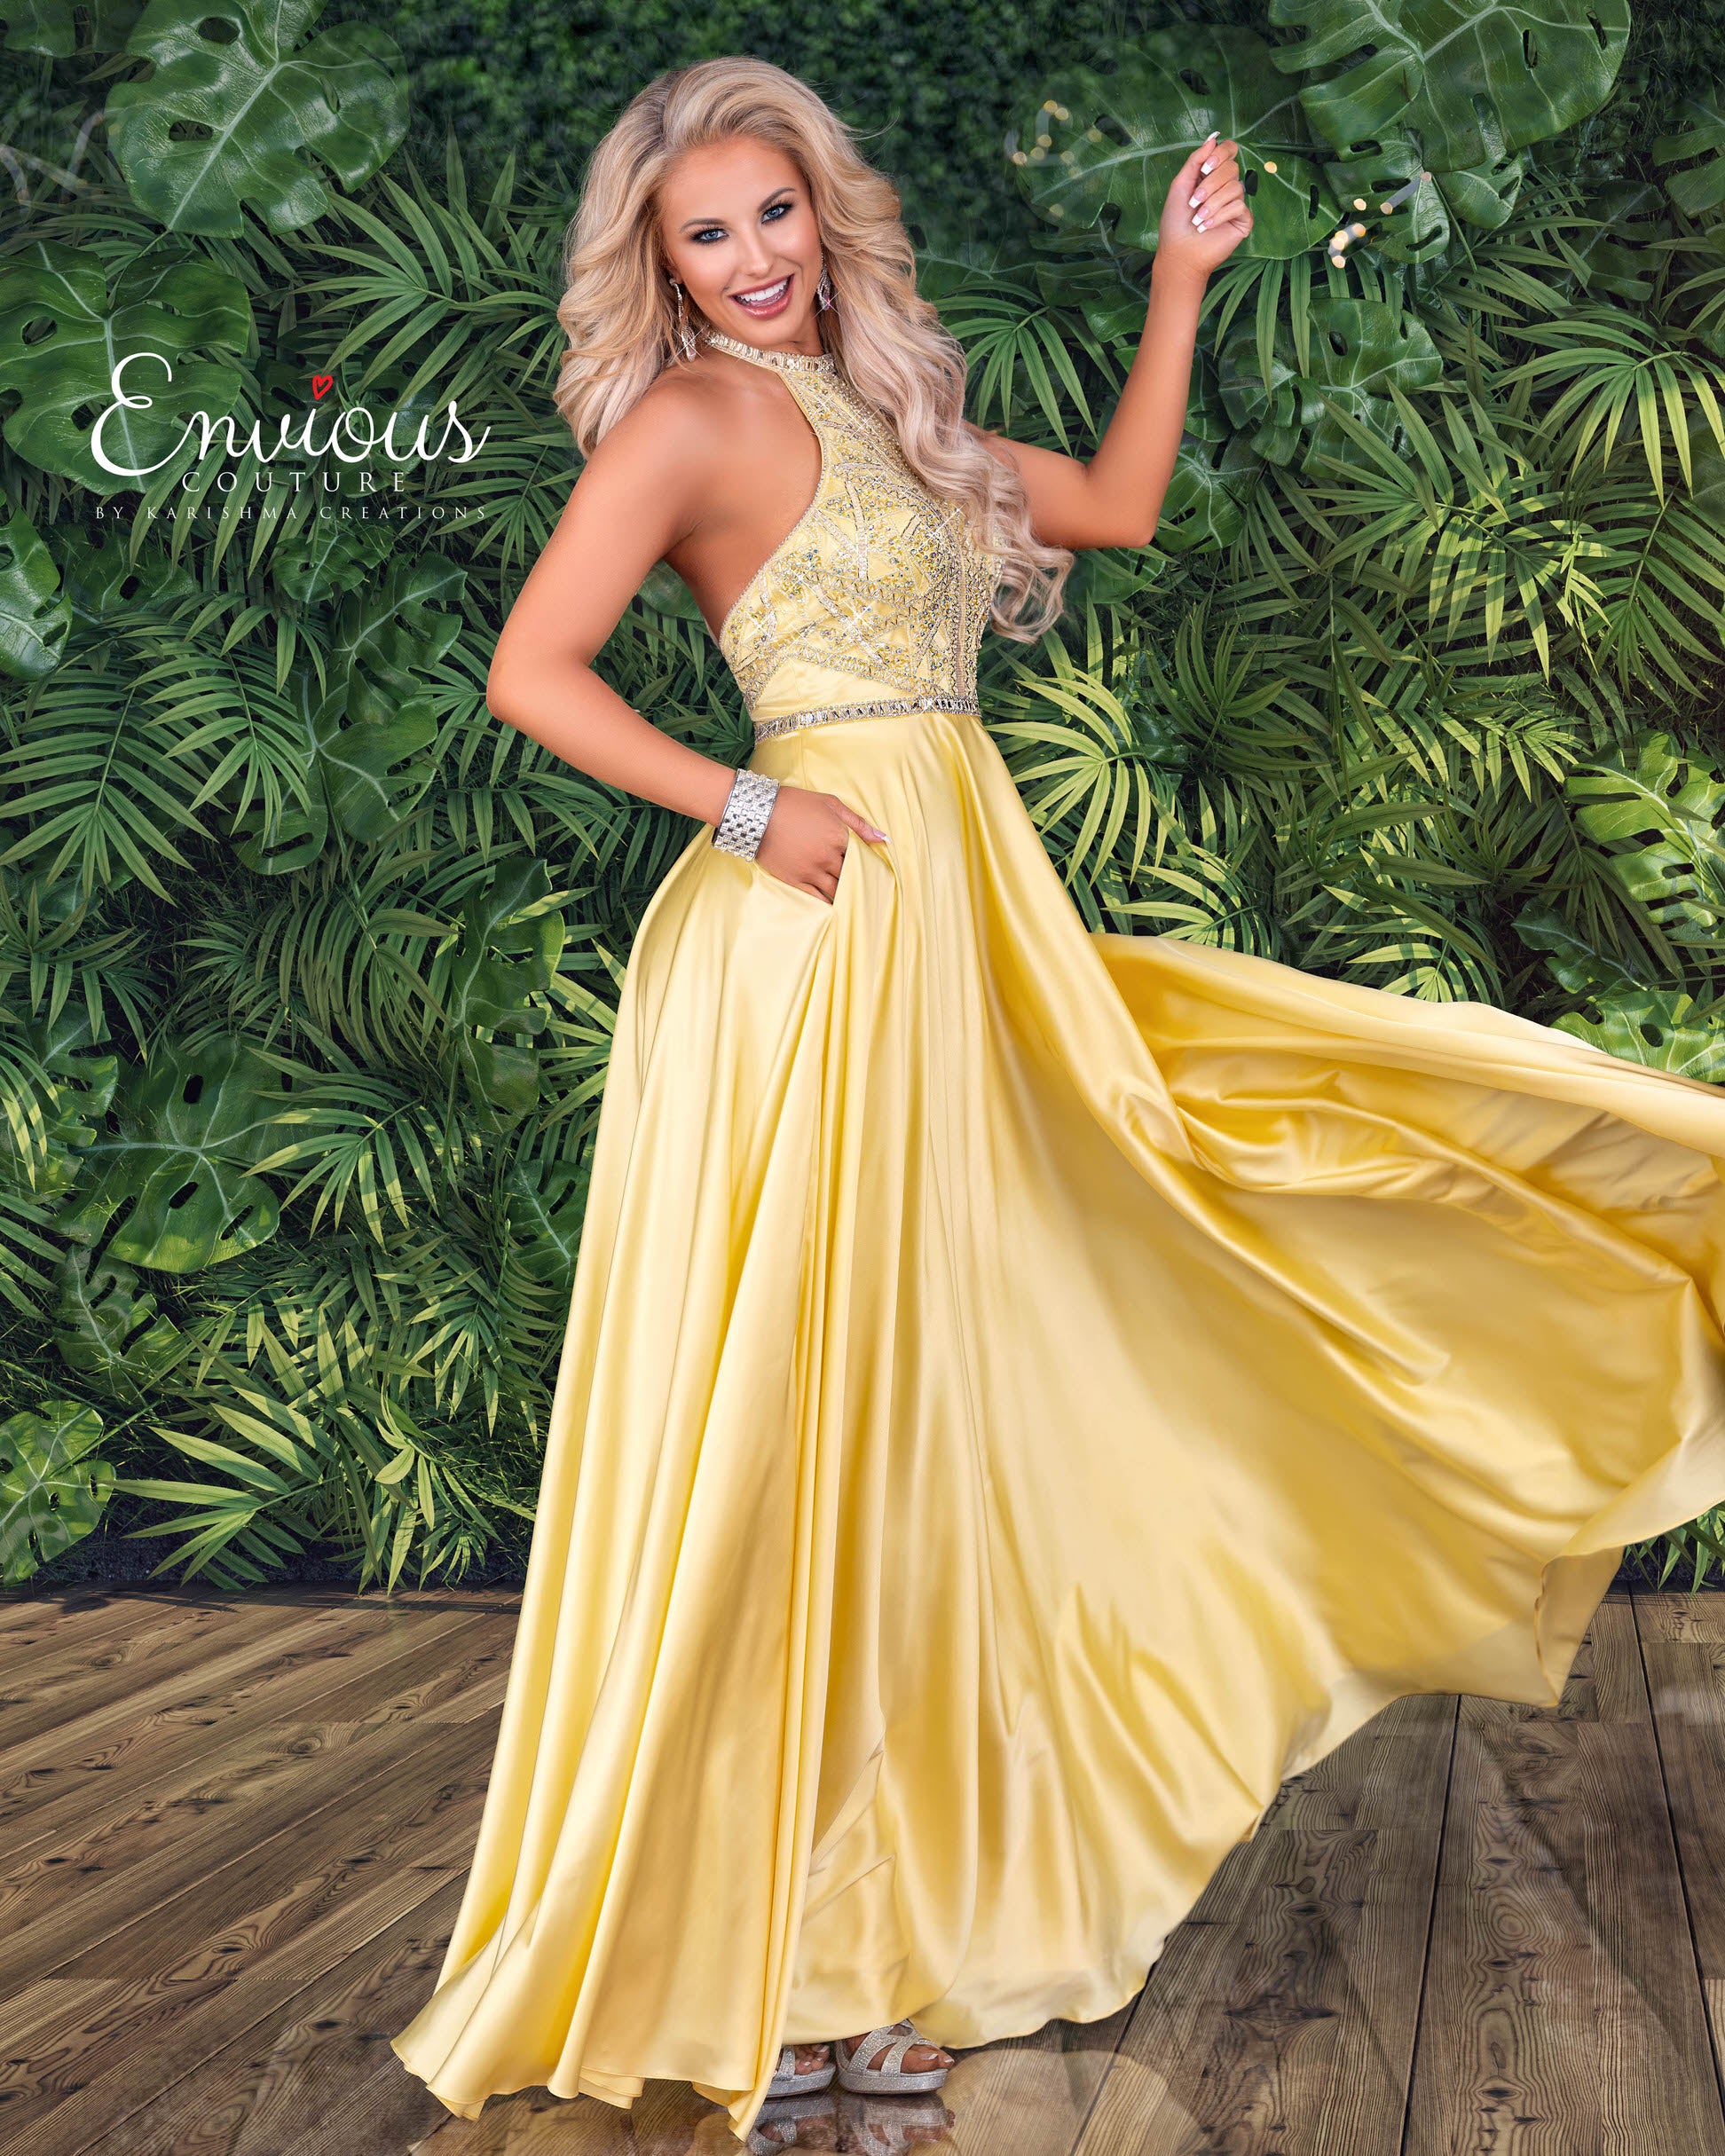 Envious-Couture-E1404-Yellow-Prom-Dress-Satin-A-Line_embellished-high-neckline